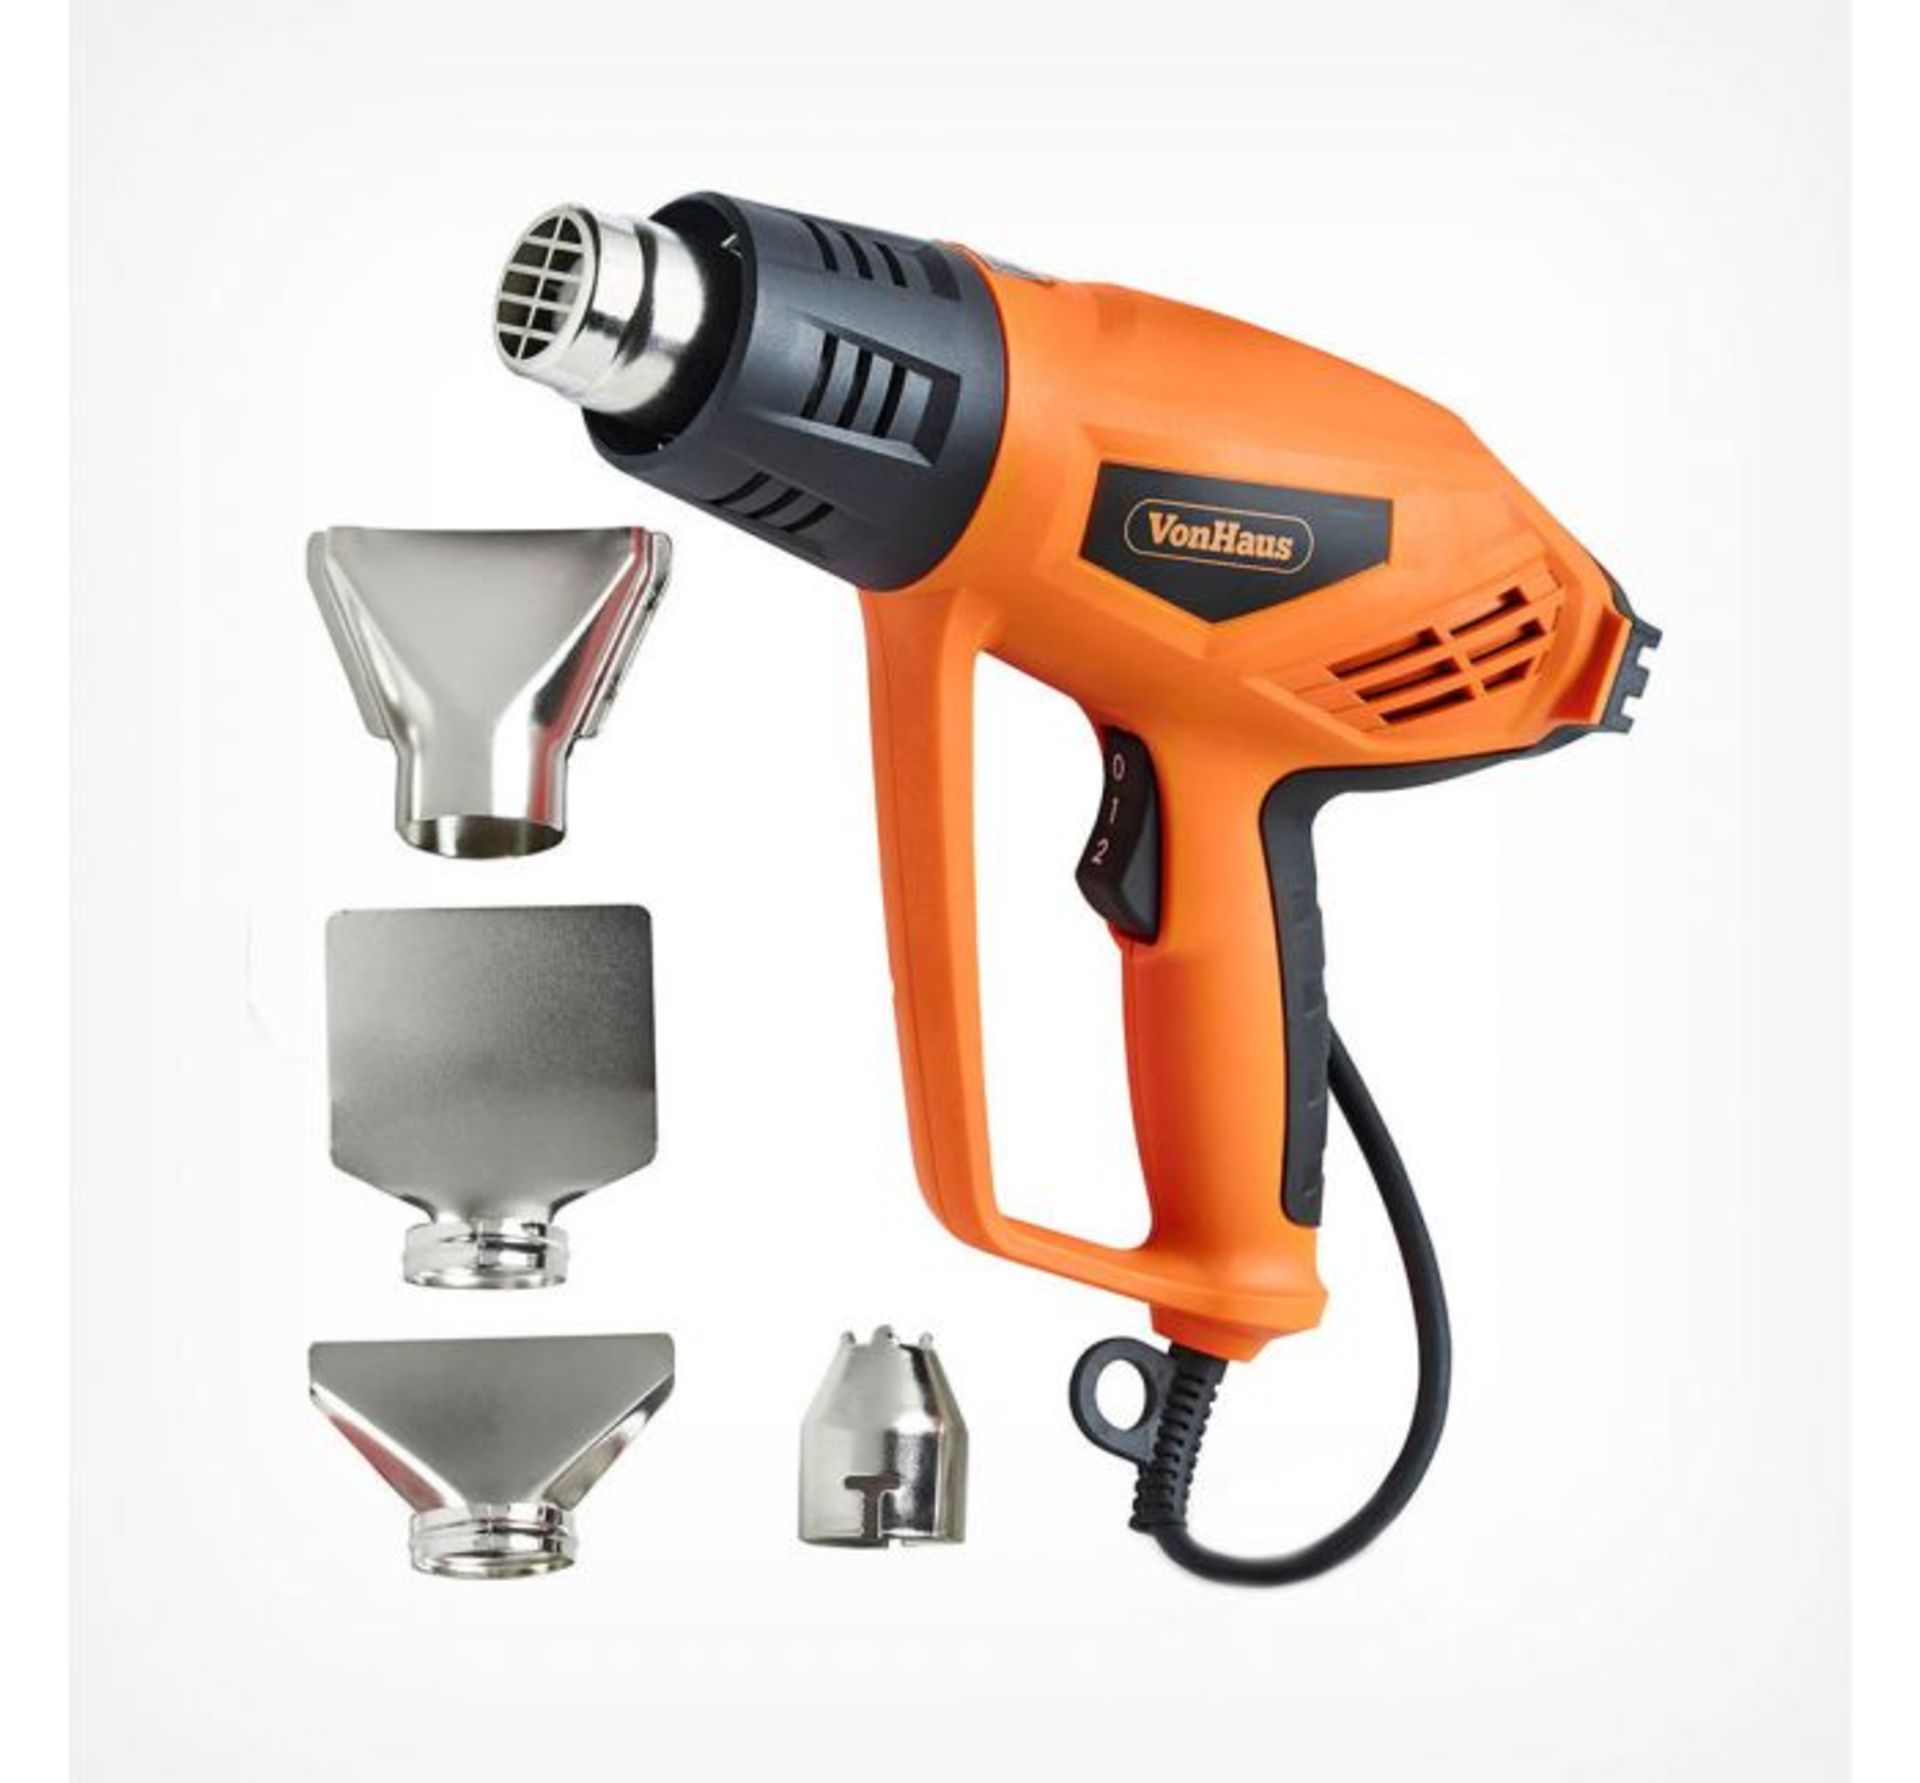 (DD47) 2000W Heat Gun Ideal for DIY projects, bending copper pipes, loosening rusted bolts, li...